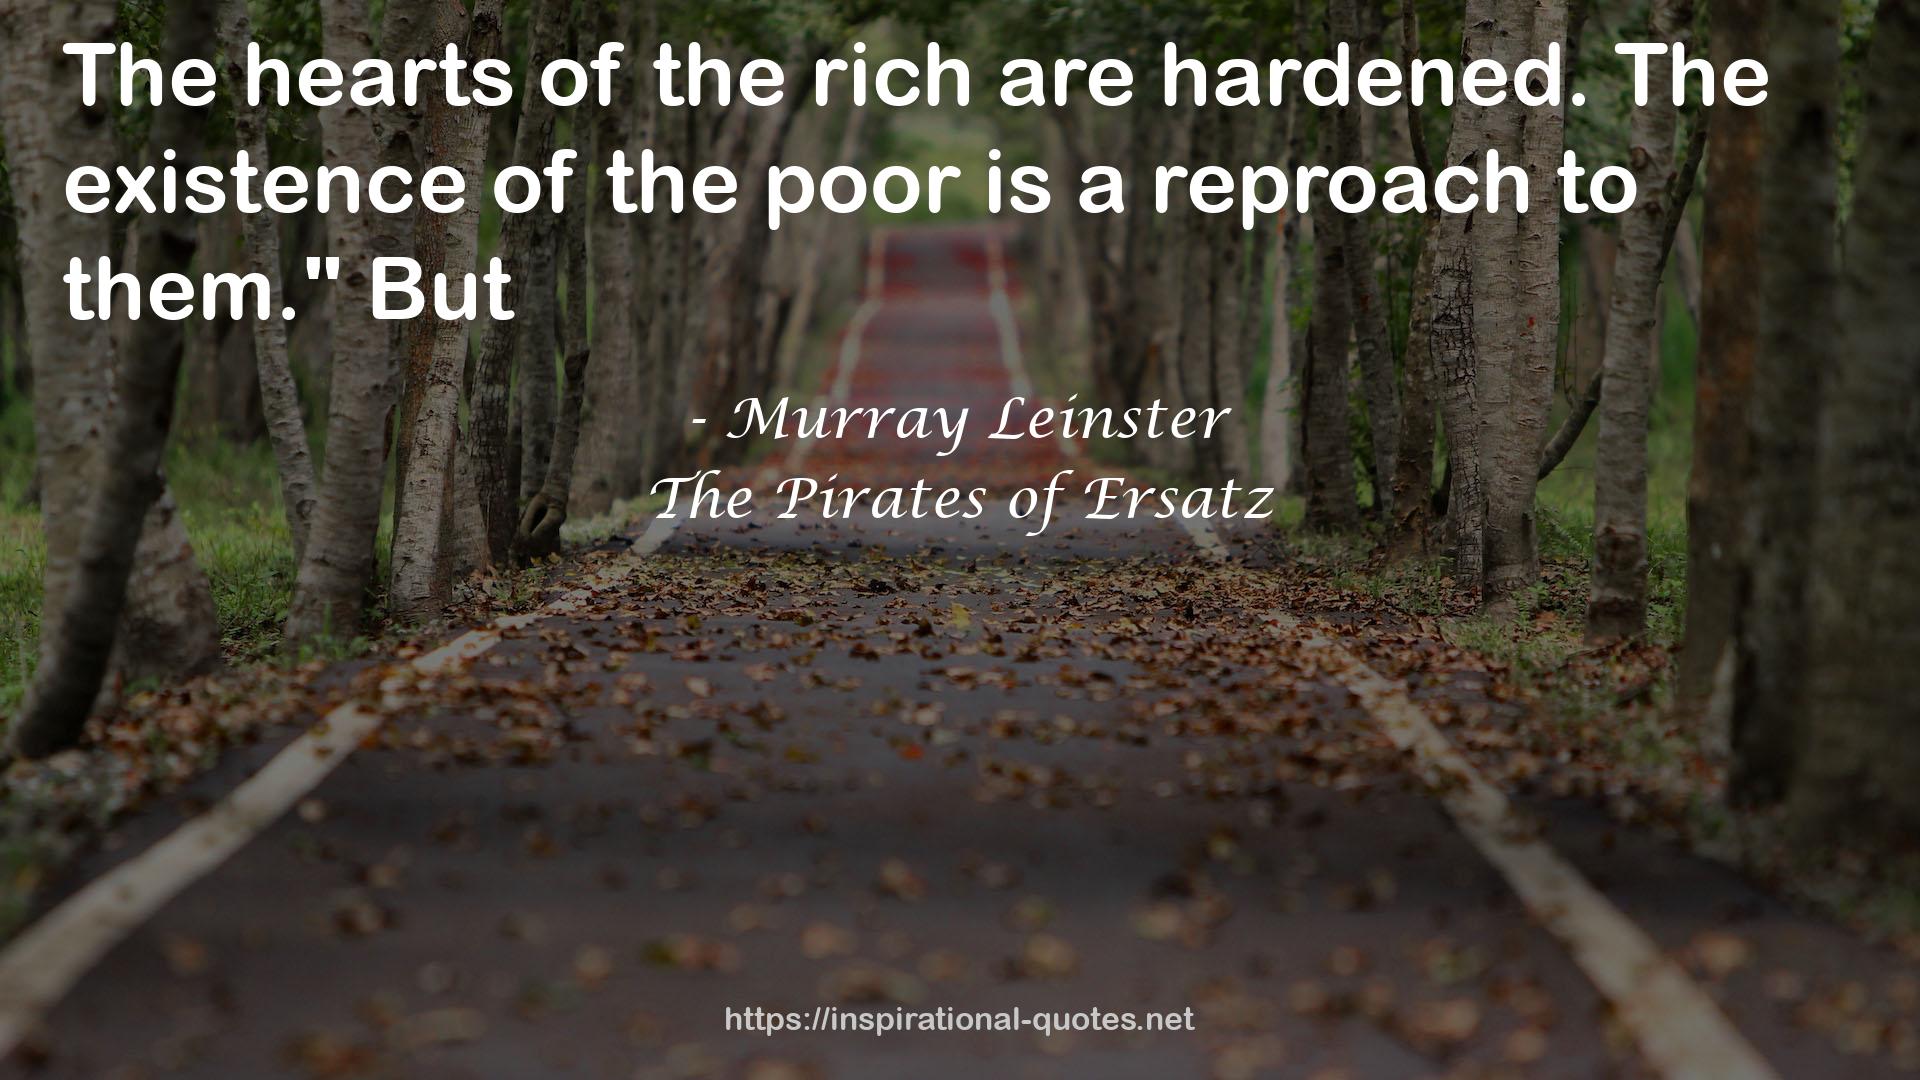 Murray Leinster QUOTES